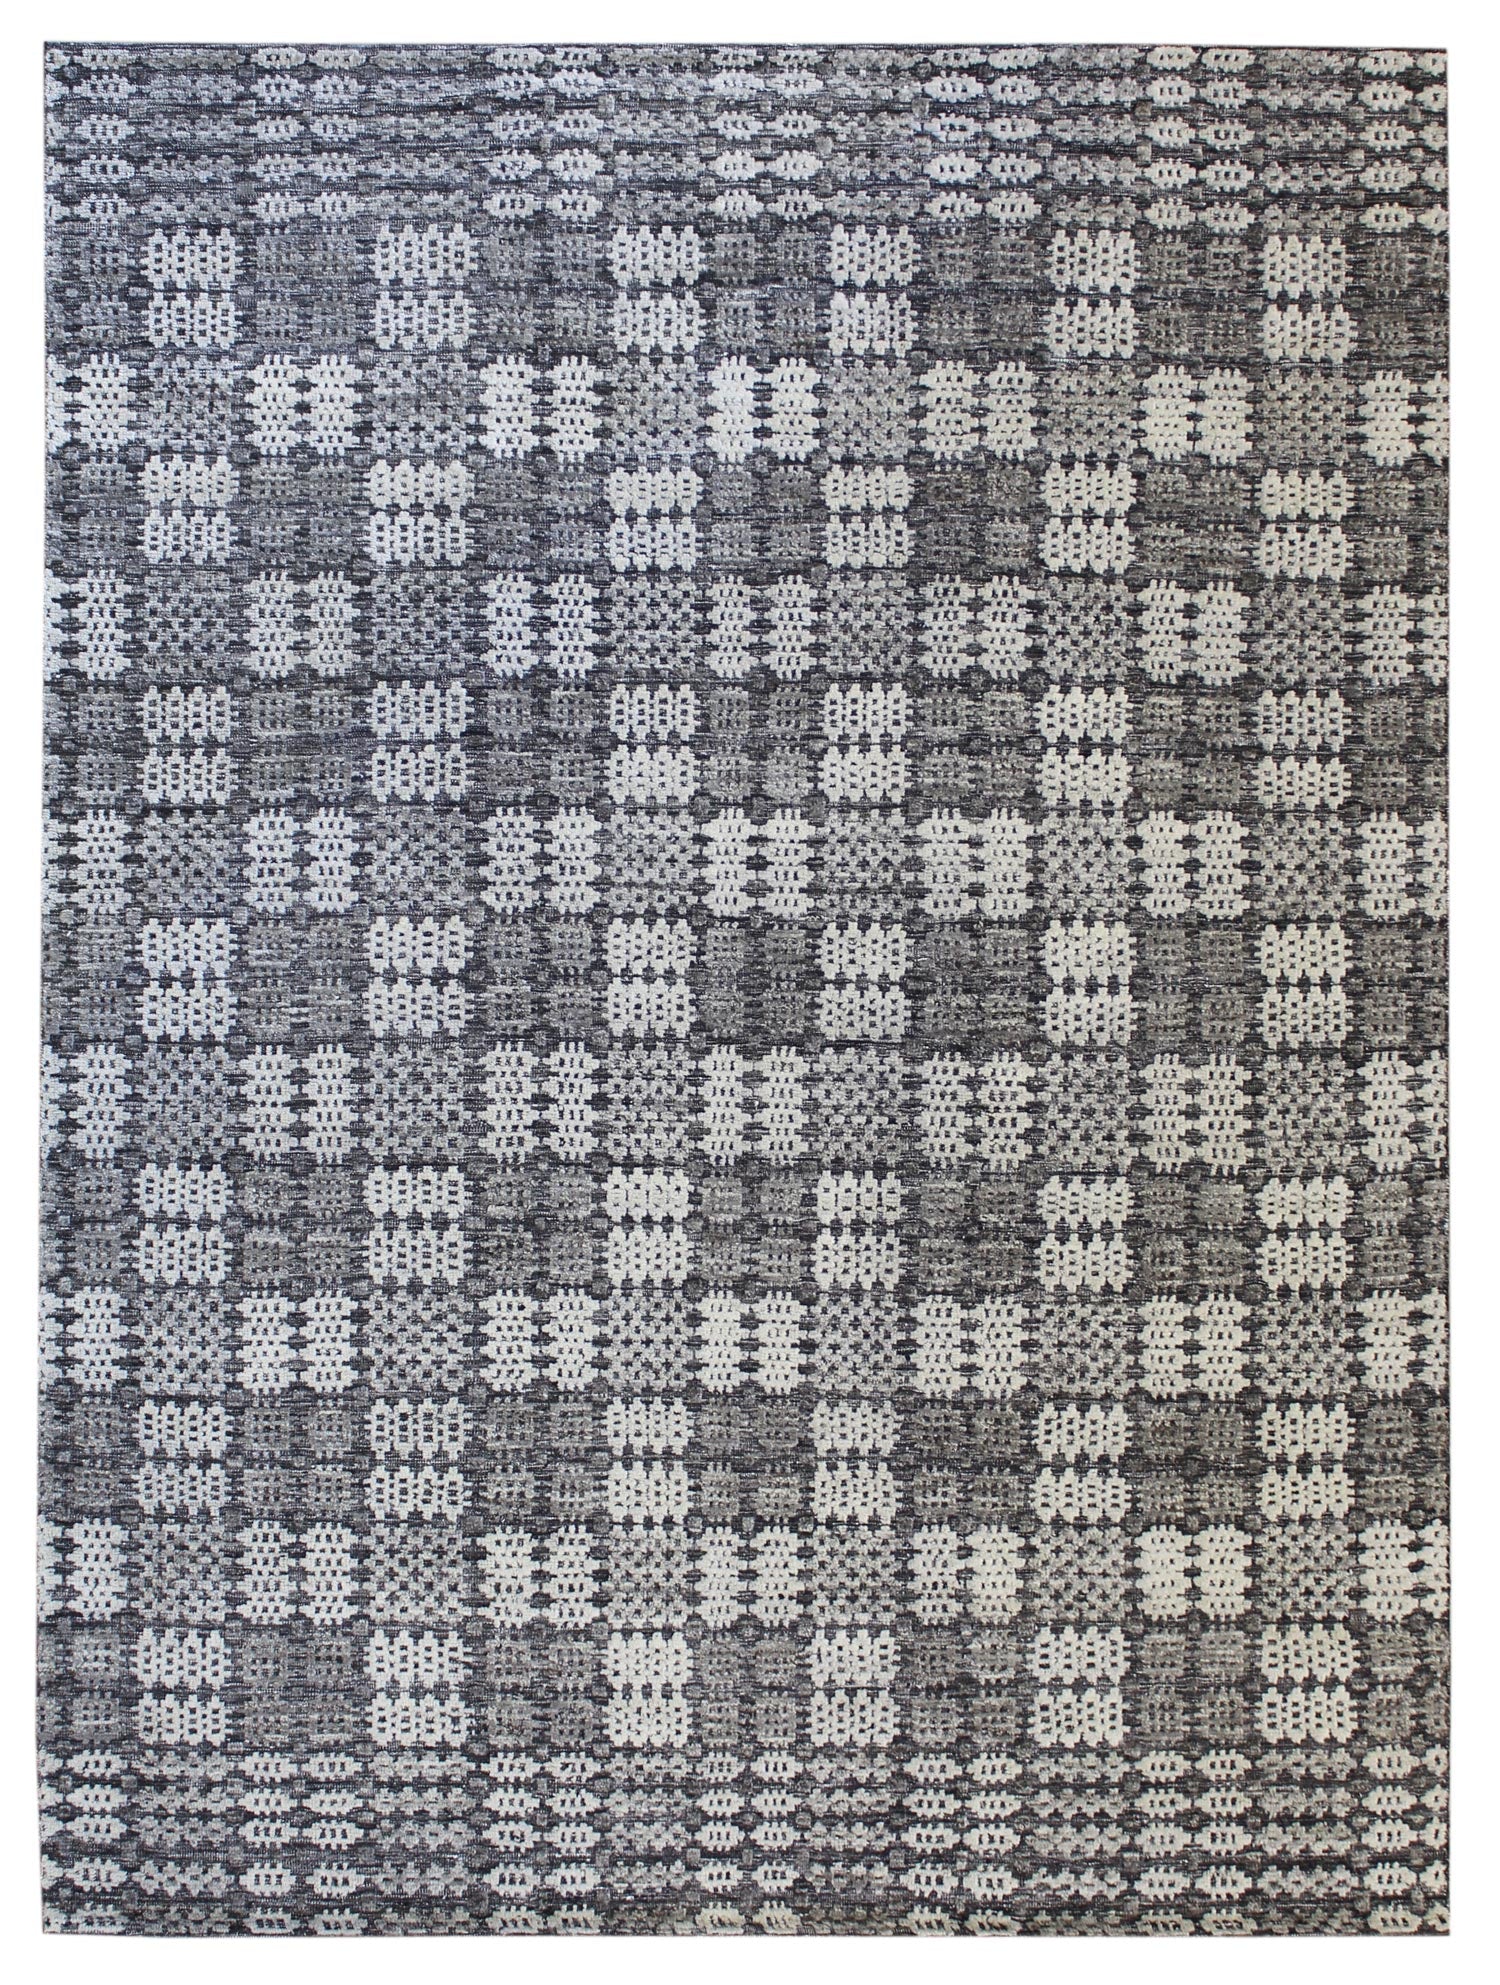 Hashtag Handwoven Transitional Rug